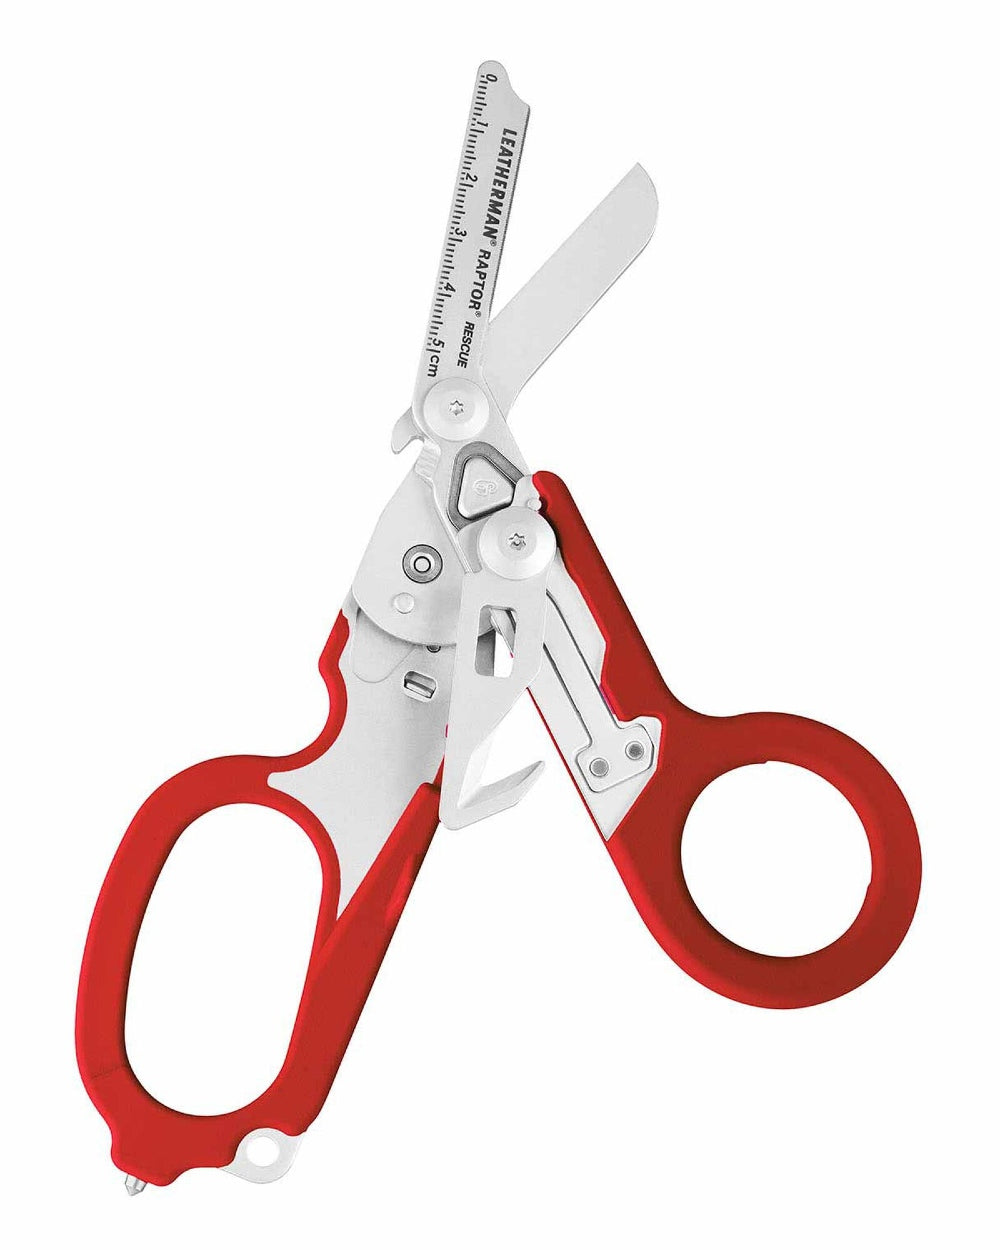 Red Coloured Leatherman Raptor Emergency Foldable Medical Shears On A White Background 